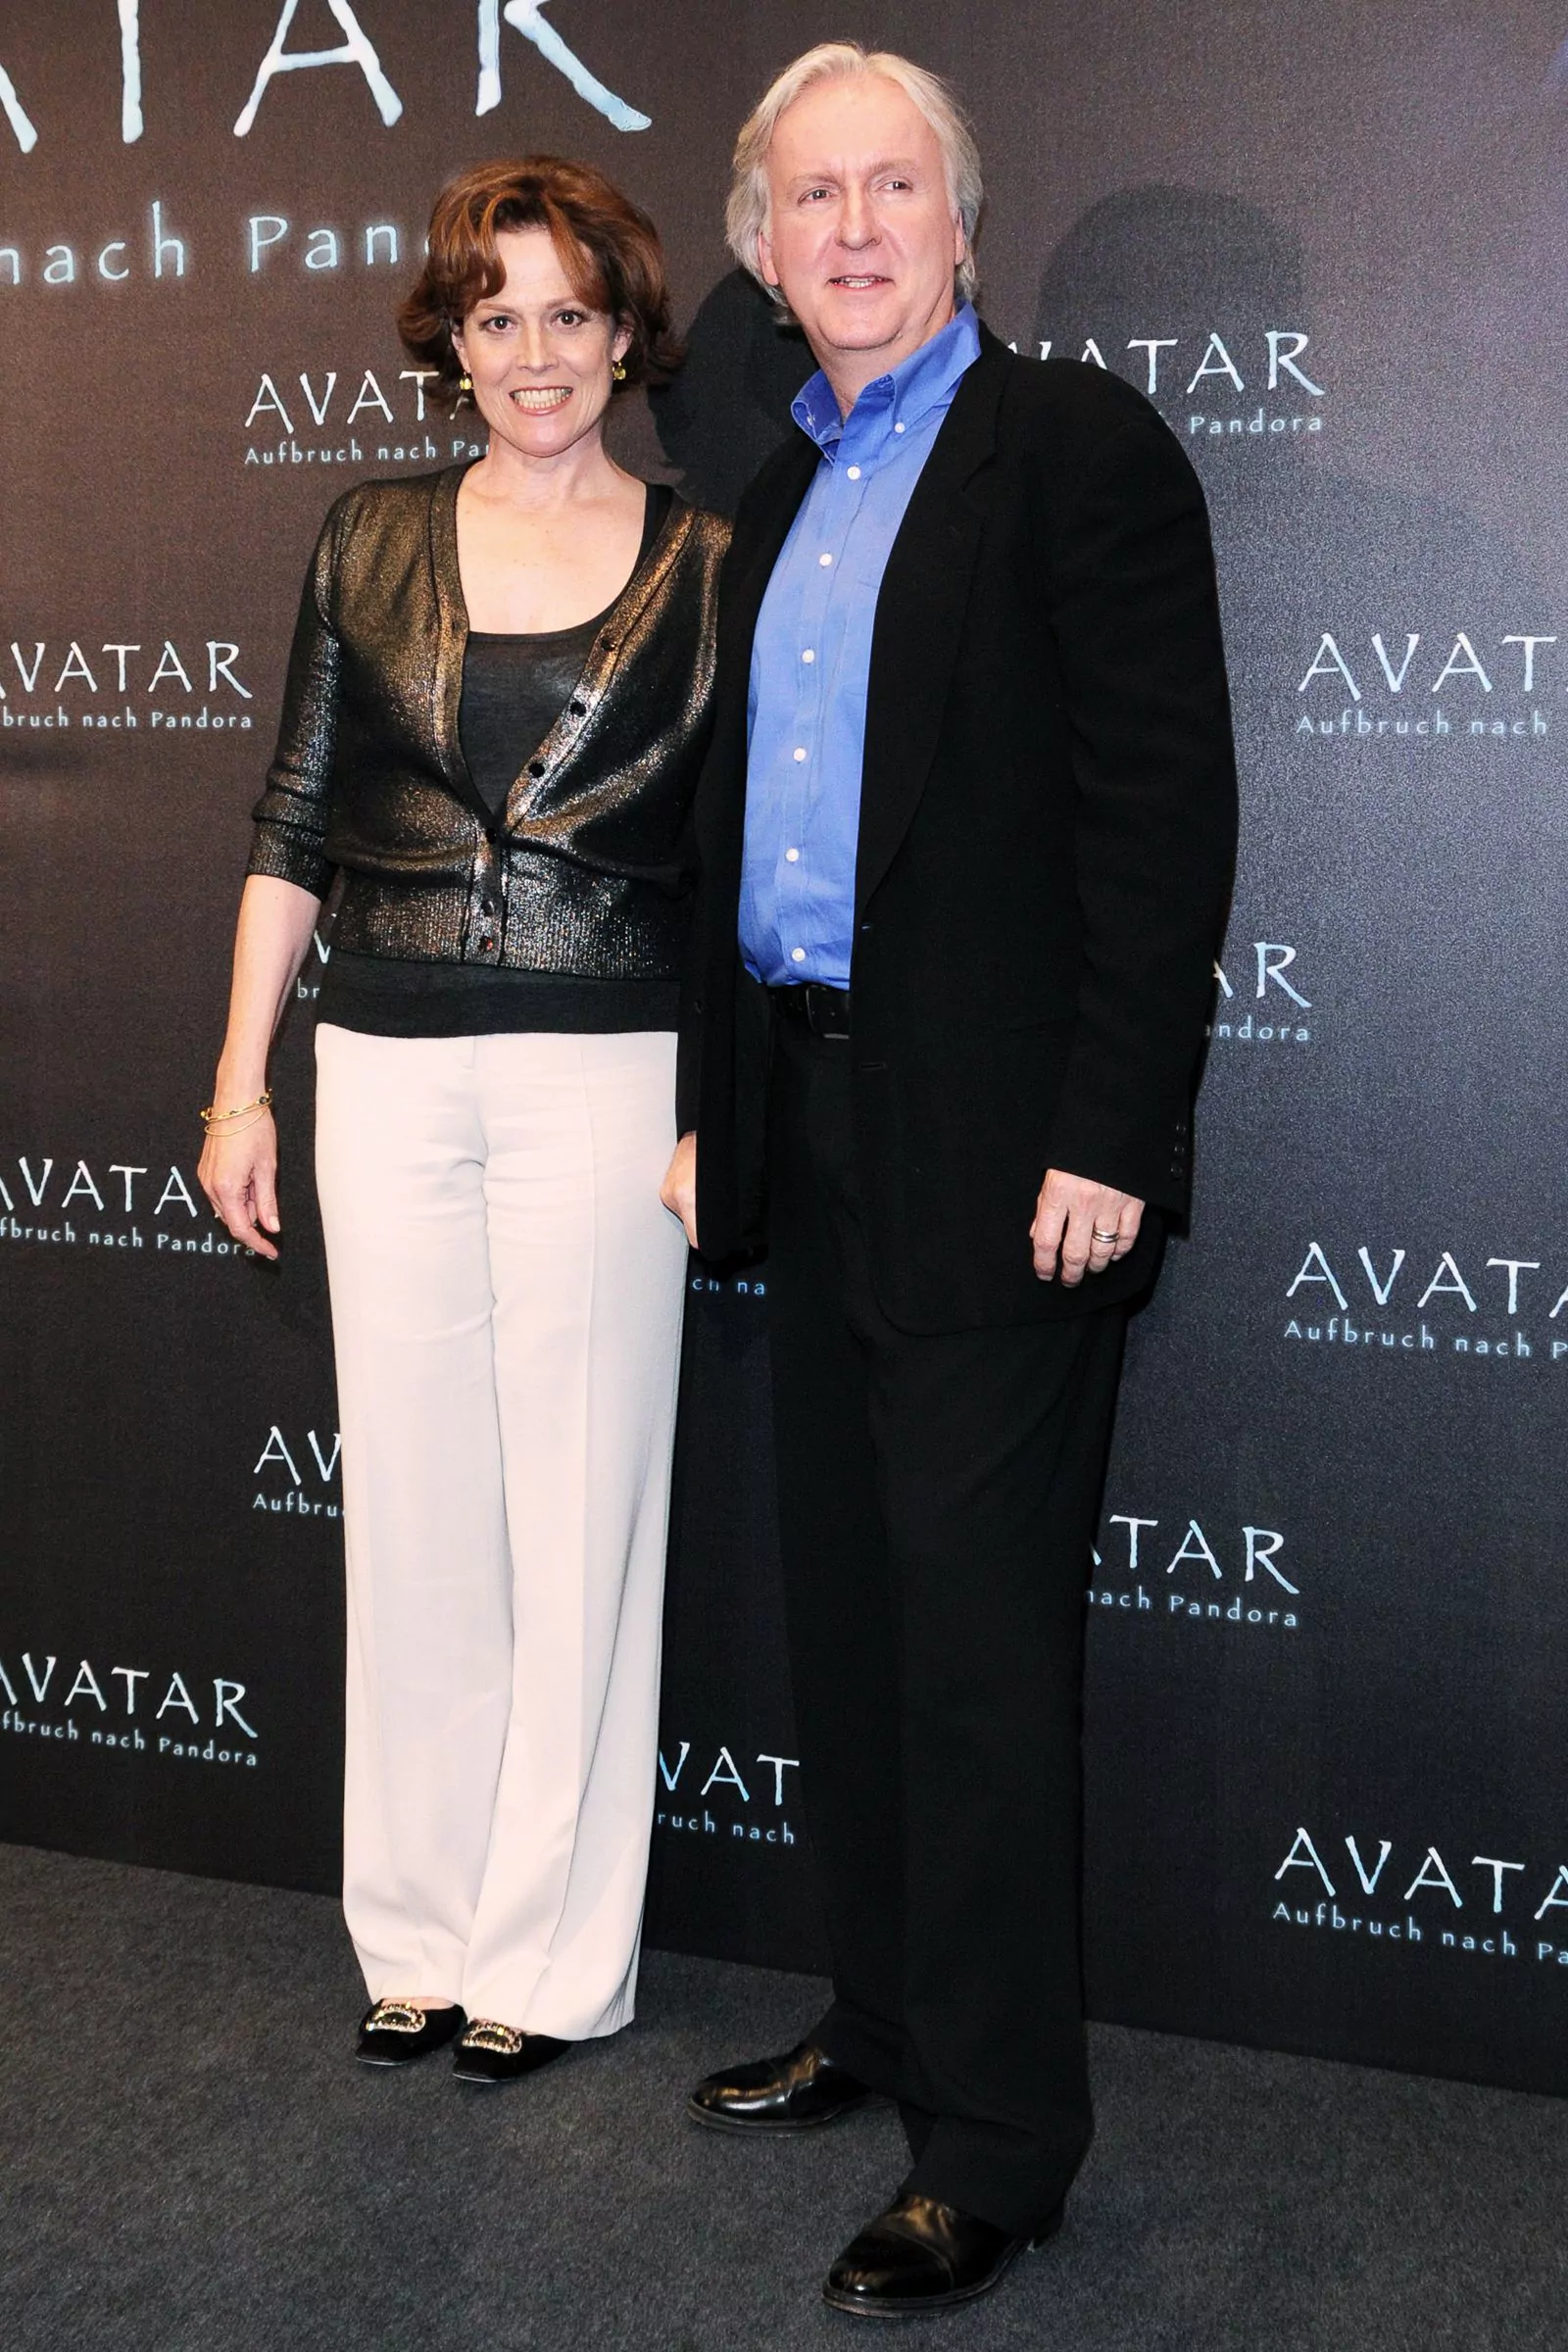 Sigourney Weaver and James Cameron at the photocall for the film "Avatar" in Berlin, December 8, 2009.